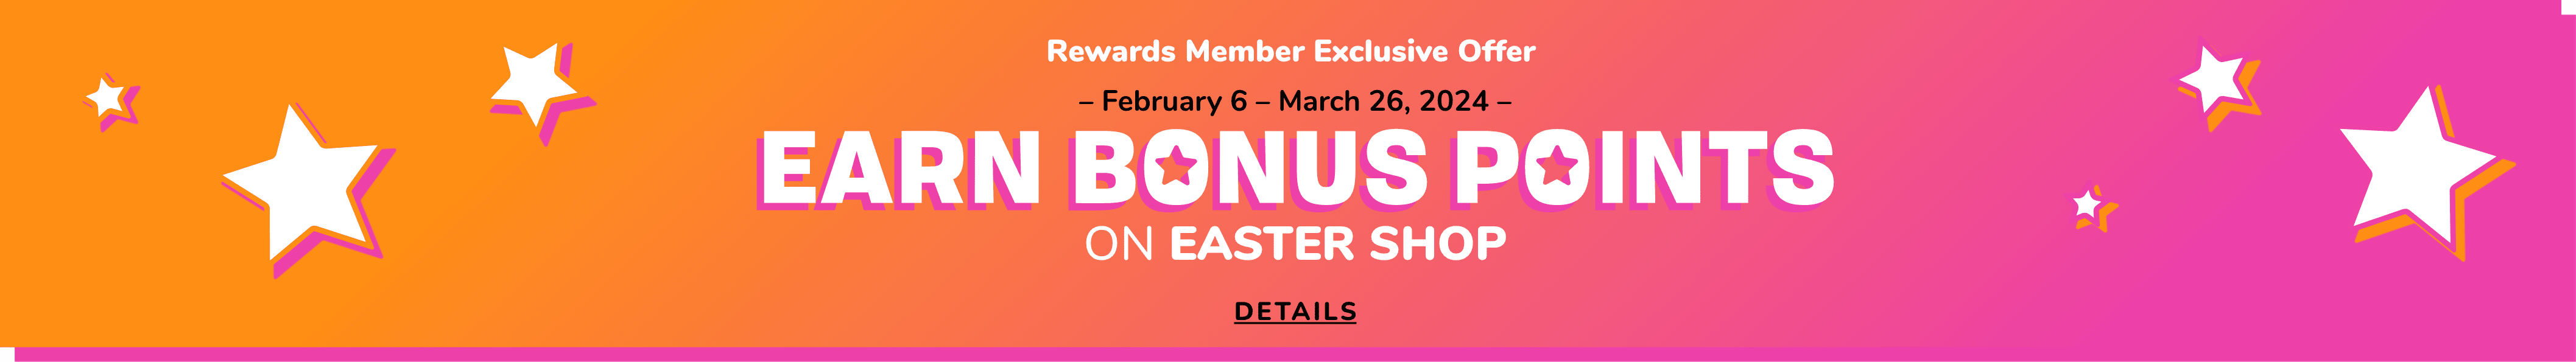 Rewards Member Exclusive. Limited Time Only-Earn Bonus Points ON EASTER SHOP